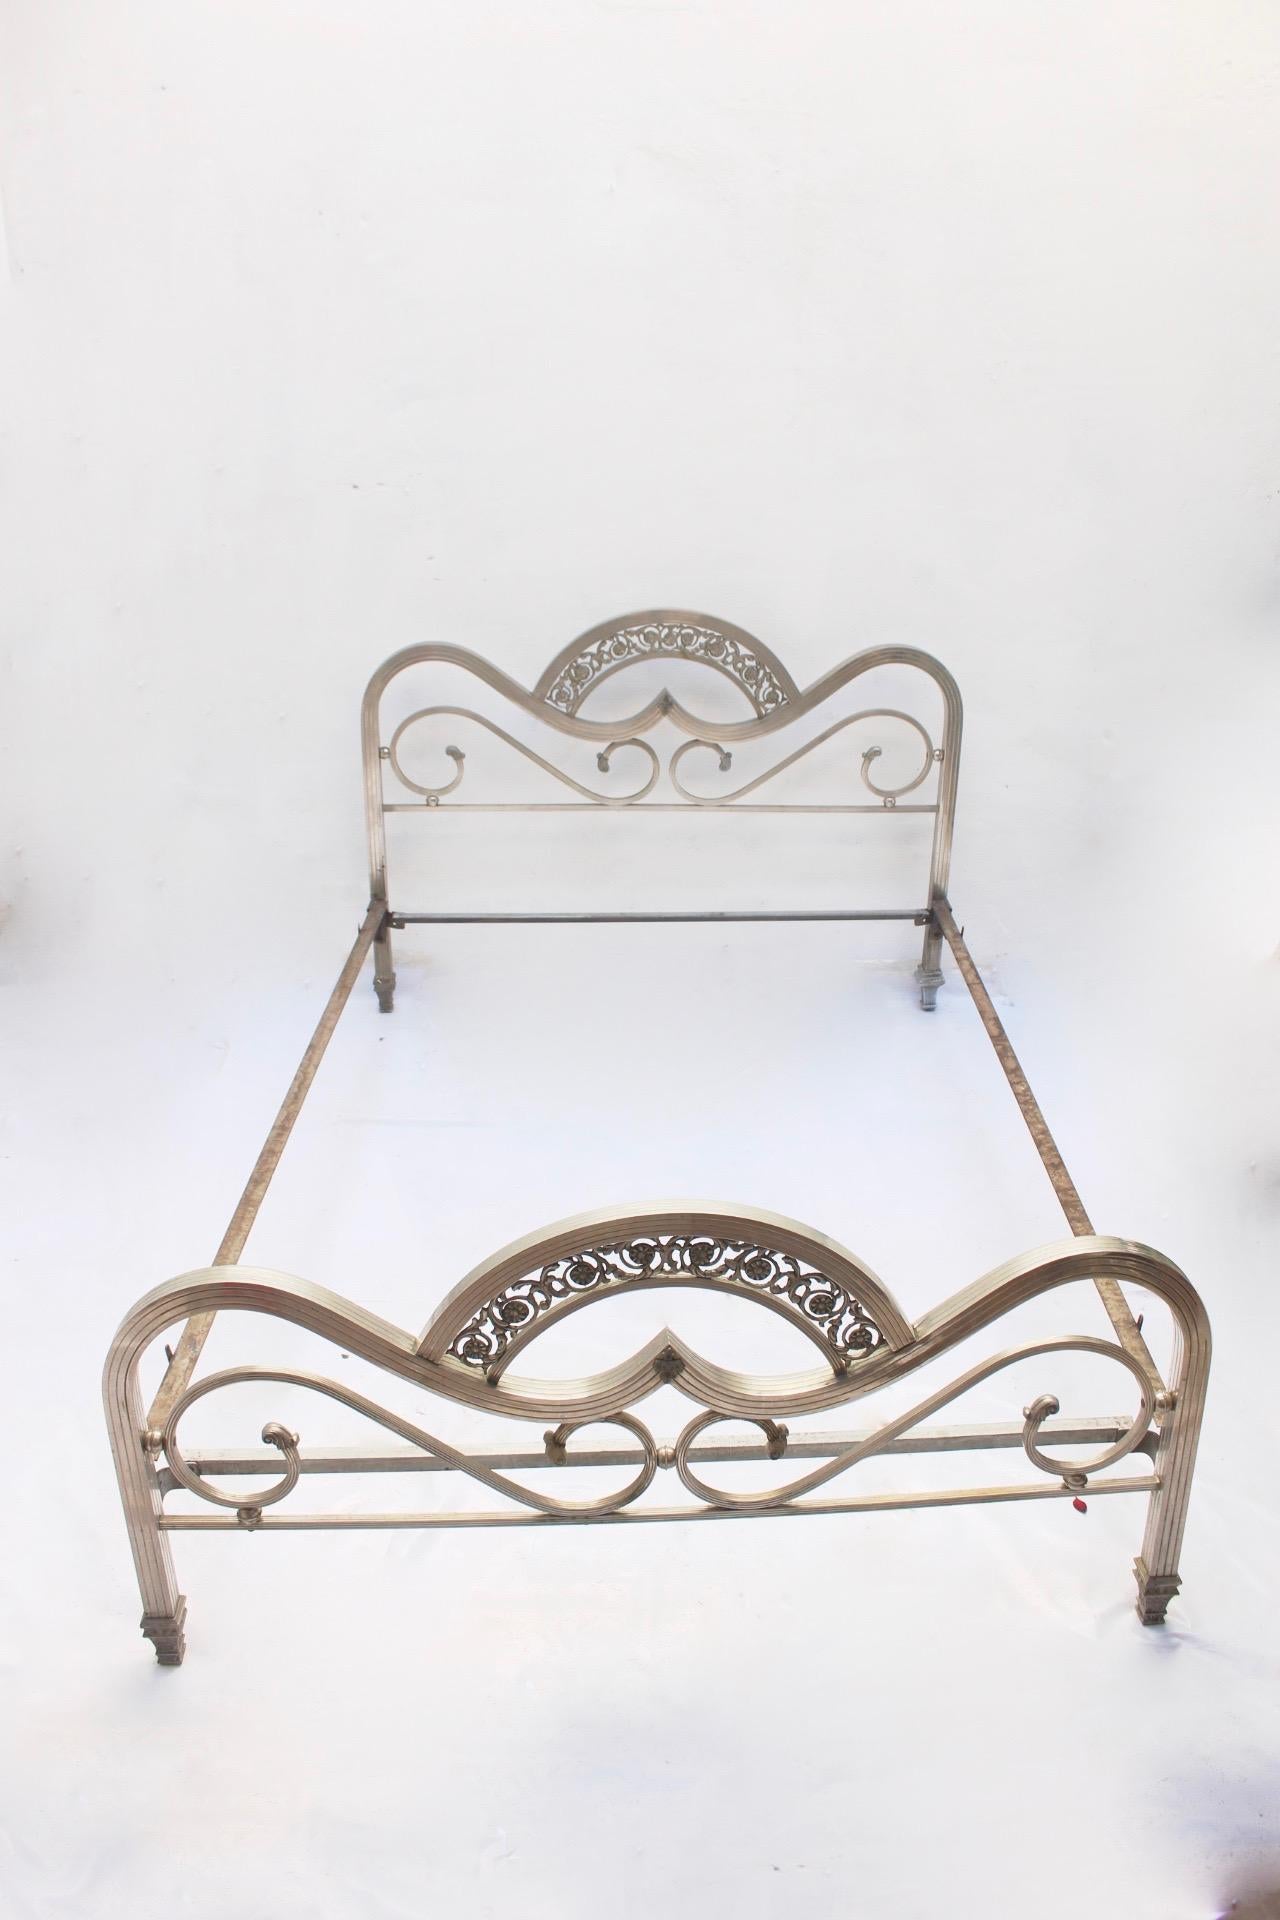 Art Deco Chrome Double Spanish Bed, Headboard and Foot Part, 1930s For Sale 6